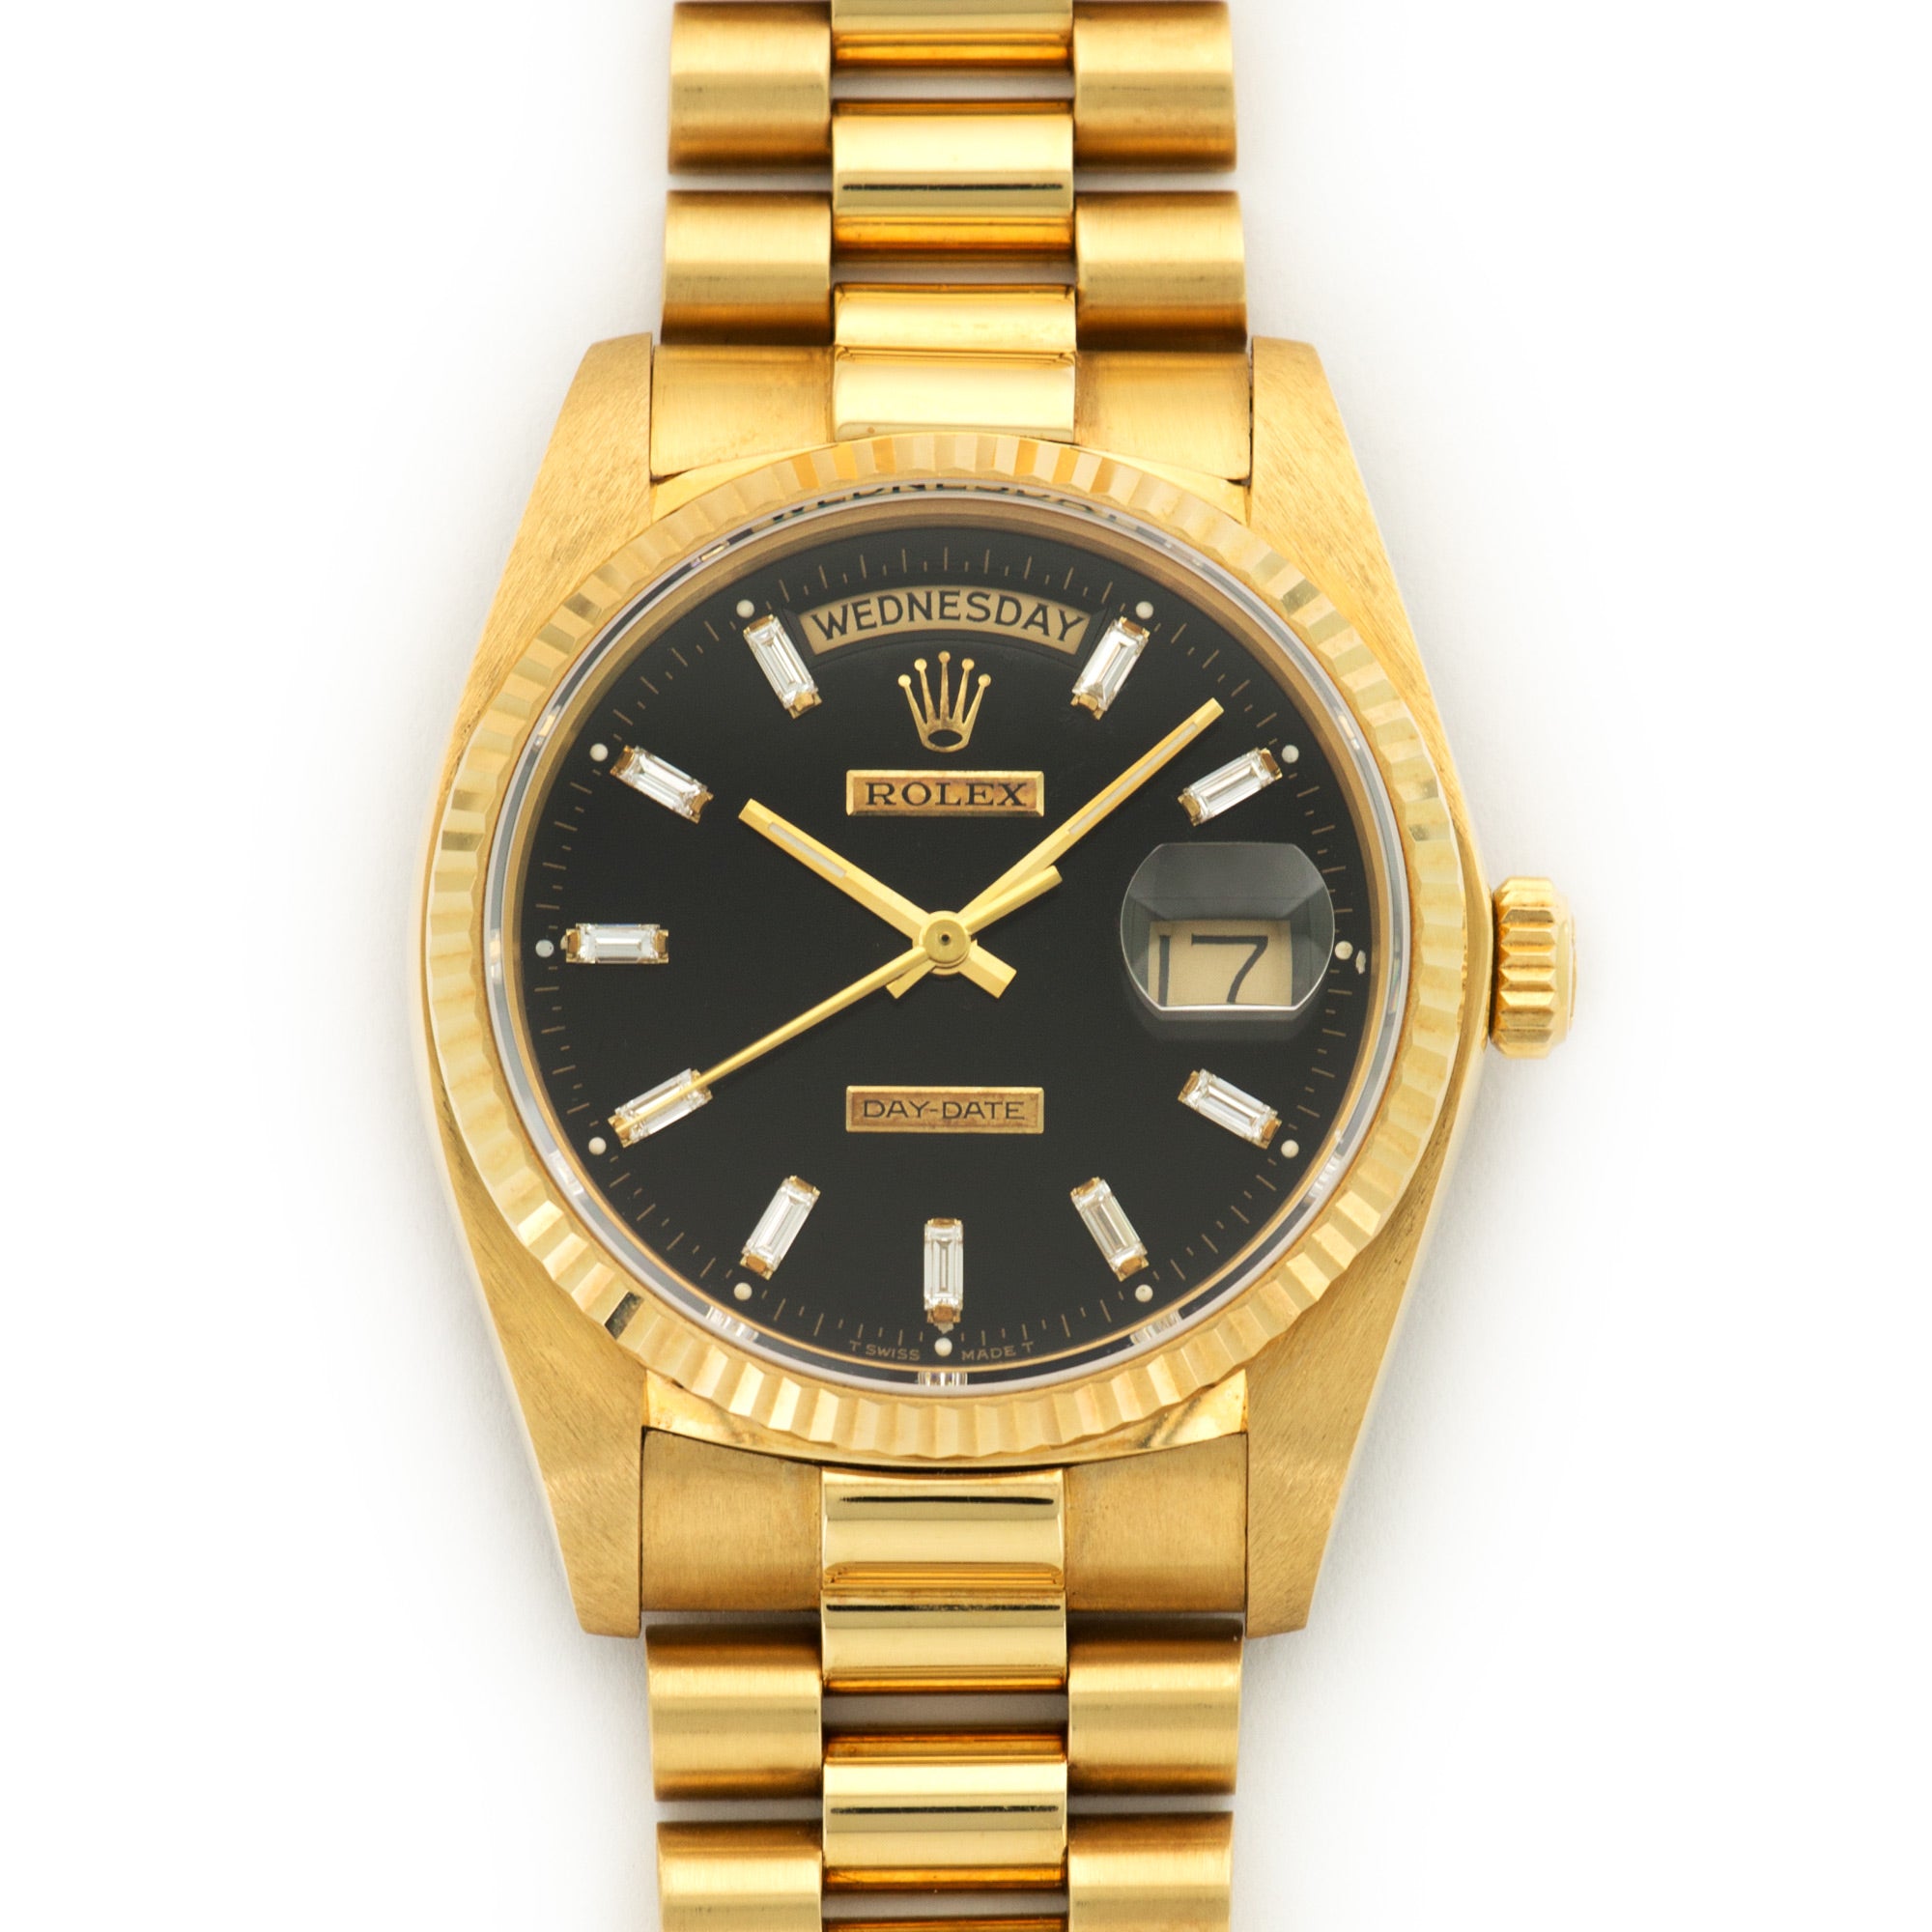 Rolex - Rolex Yellow Gold Day-Date Baguette Diamond Watch- N.O.S. - The Keystone Watches